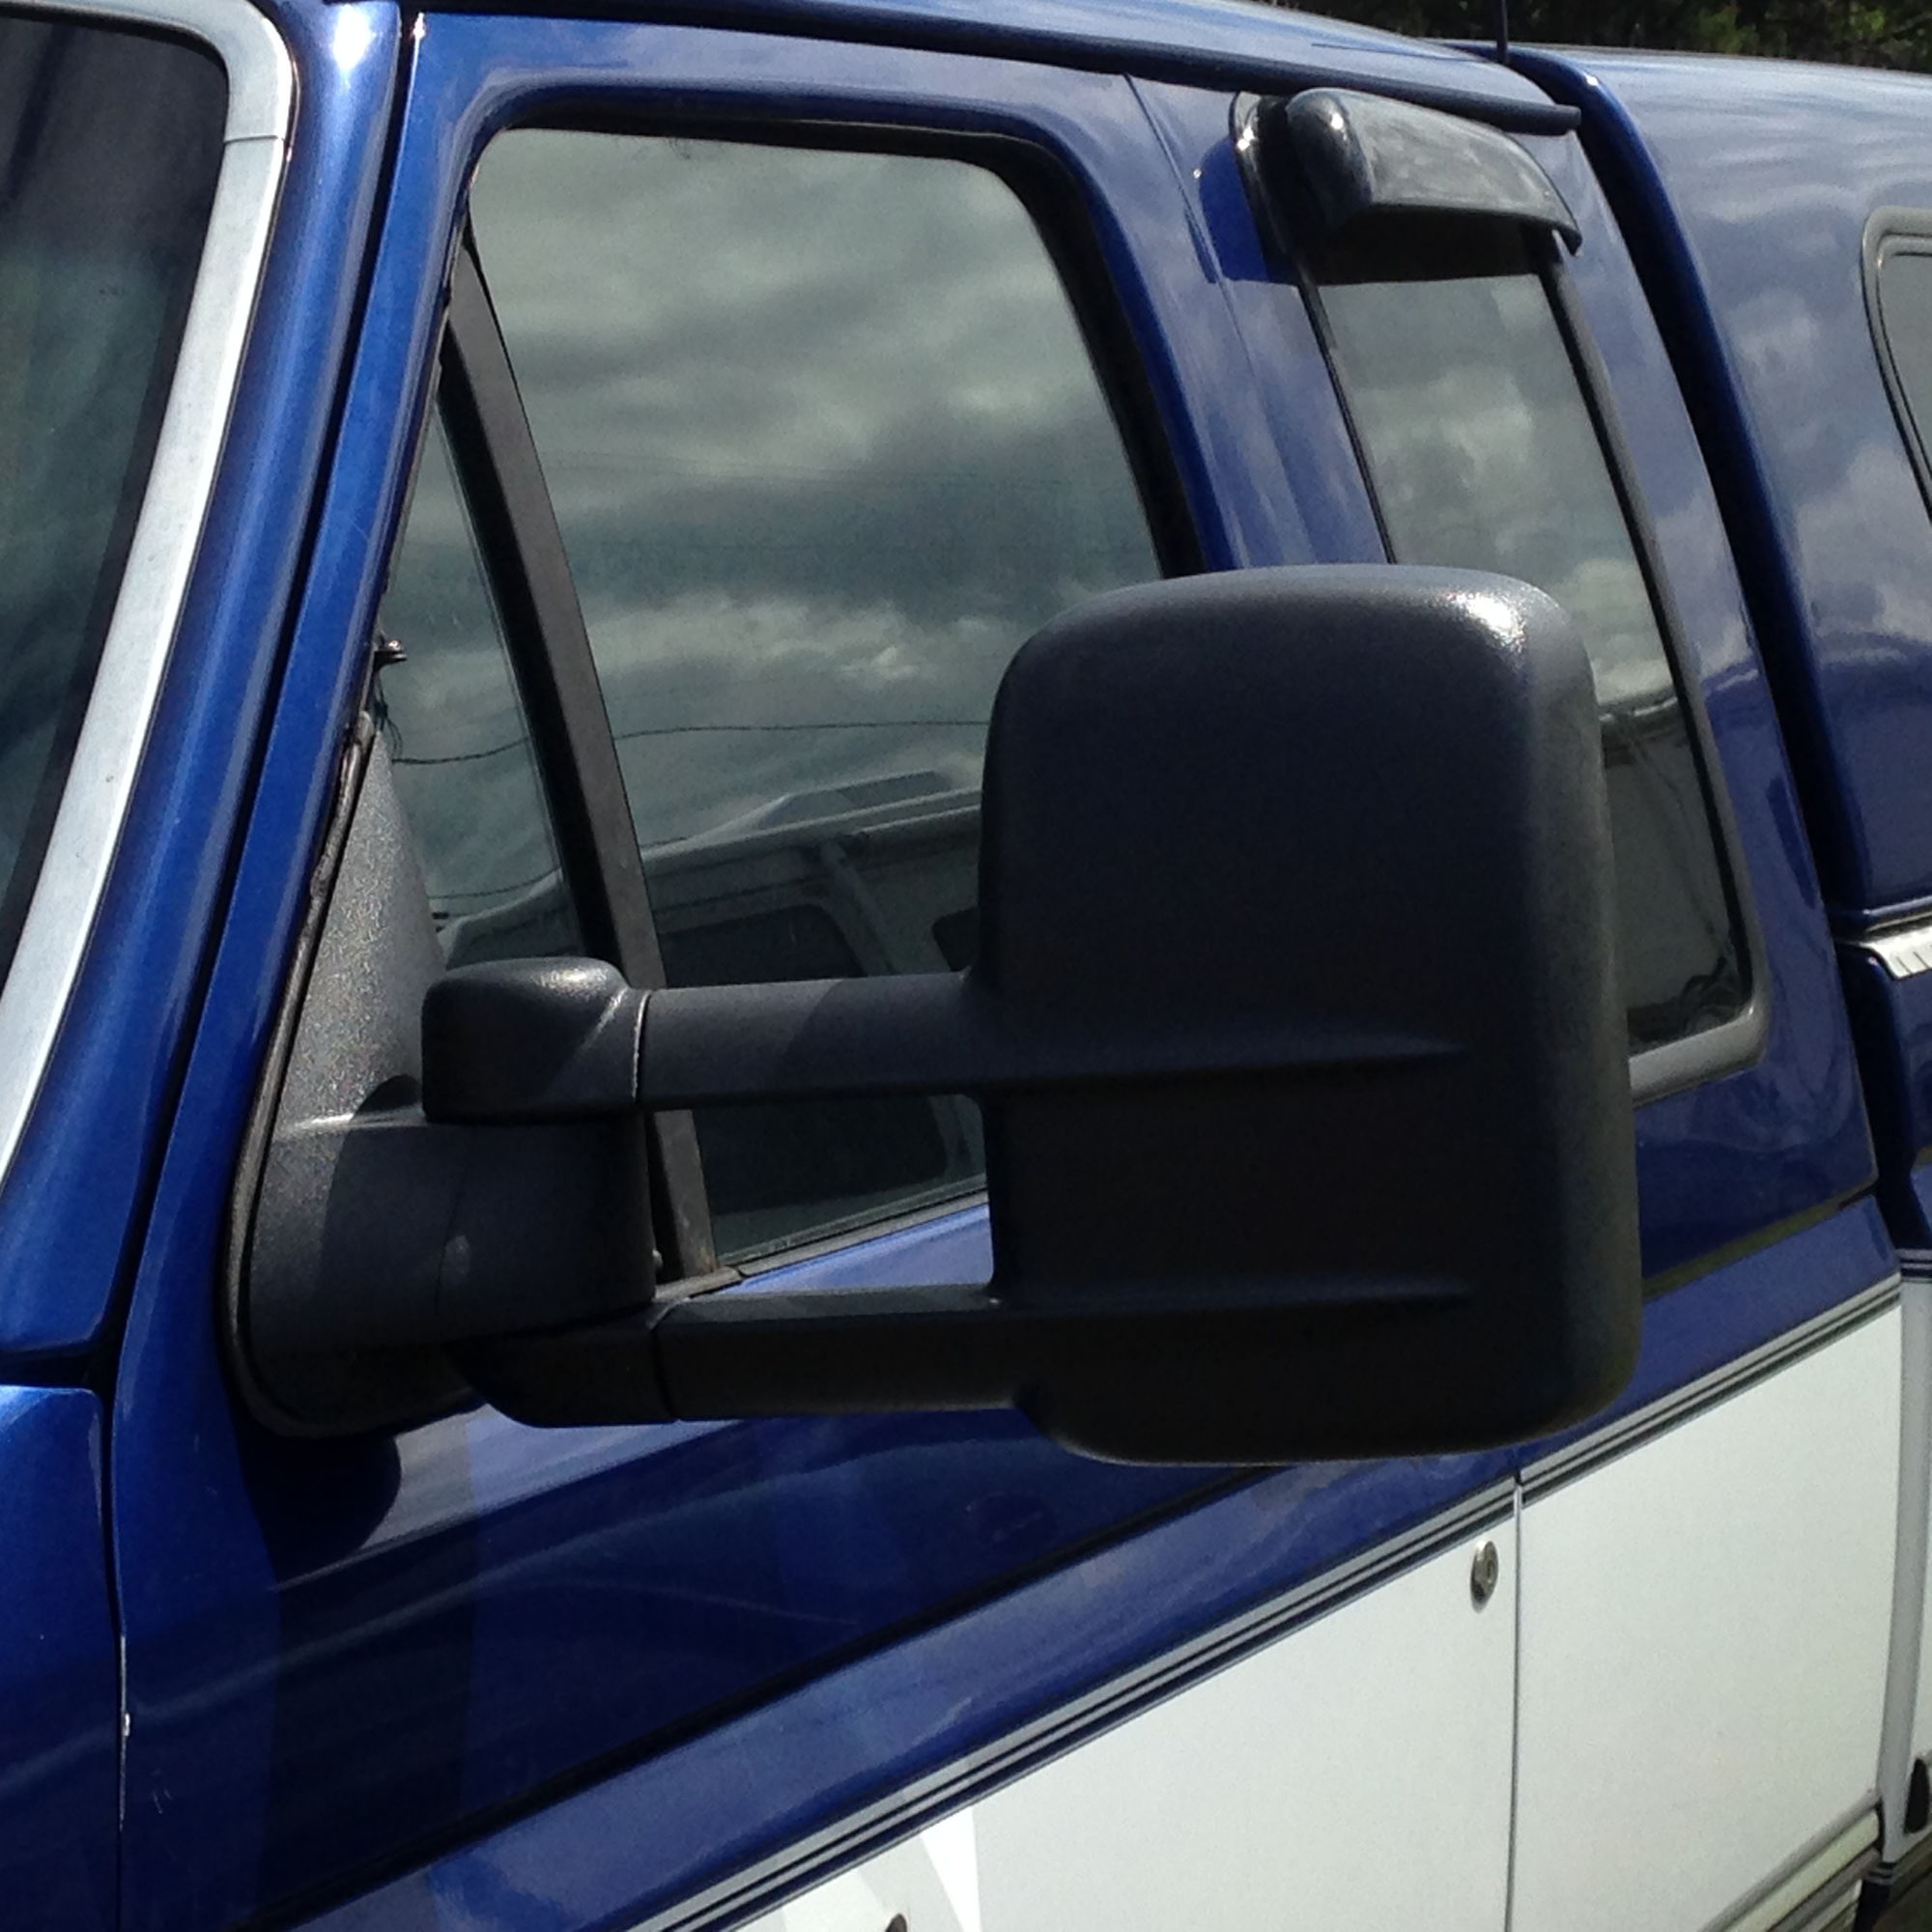 Mirrors Ford F250 1997 F350 Towing Duty Super 1995 Telescoping Mirror Truck...